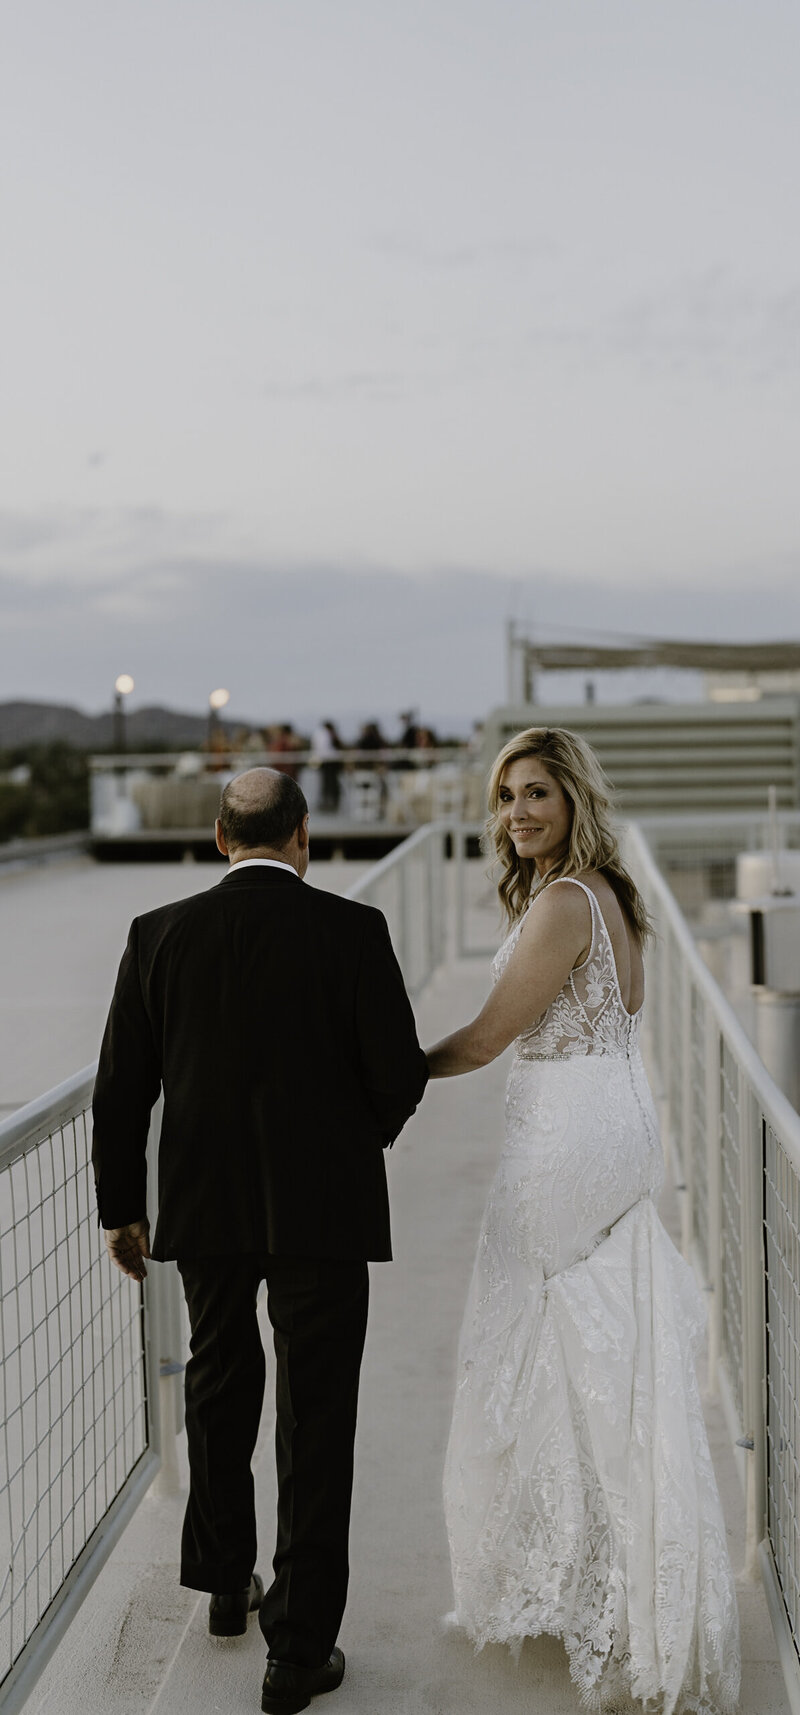 A bride in a detailed lace wedding gown walks along a bridge holding hands with a man in a black suit, looking back over her shoulder with a radiant smile. The bridge's railing and lighting create a modern and romantic evening atmosphere, with guests visible in the background enjoying the event.